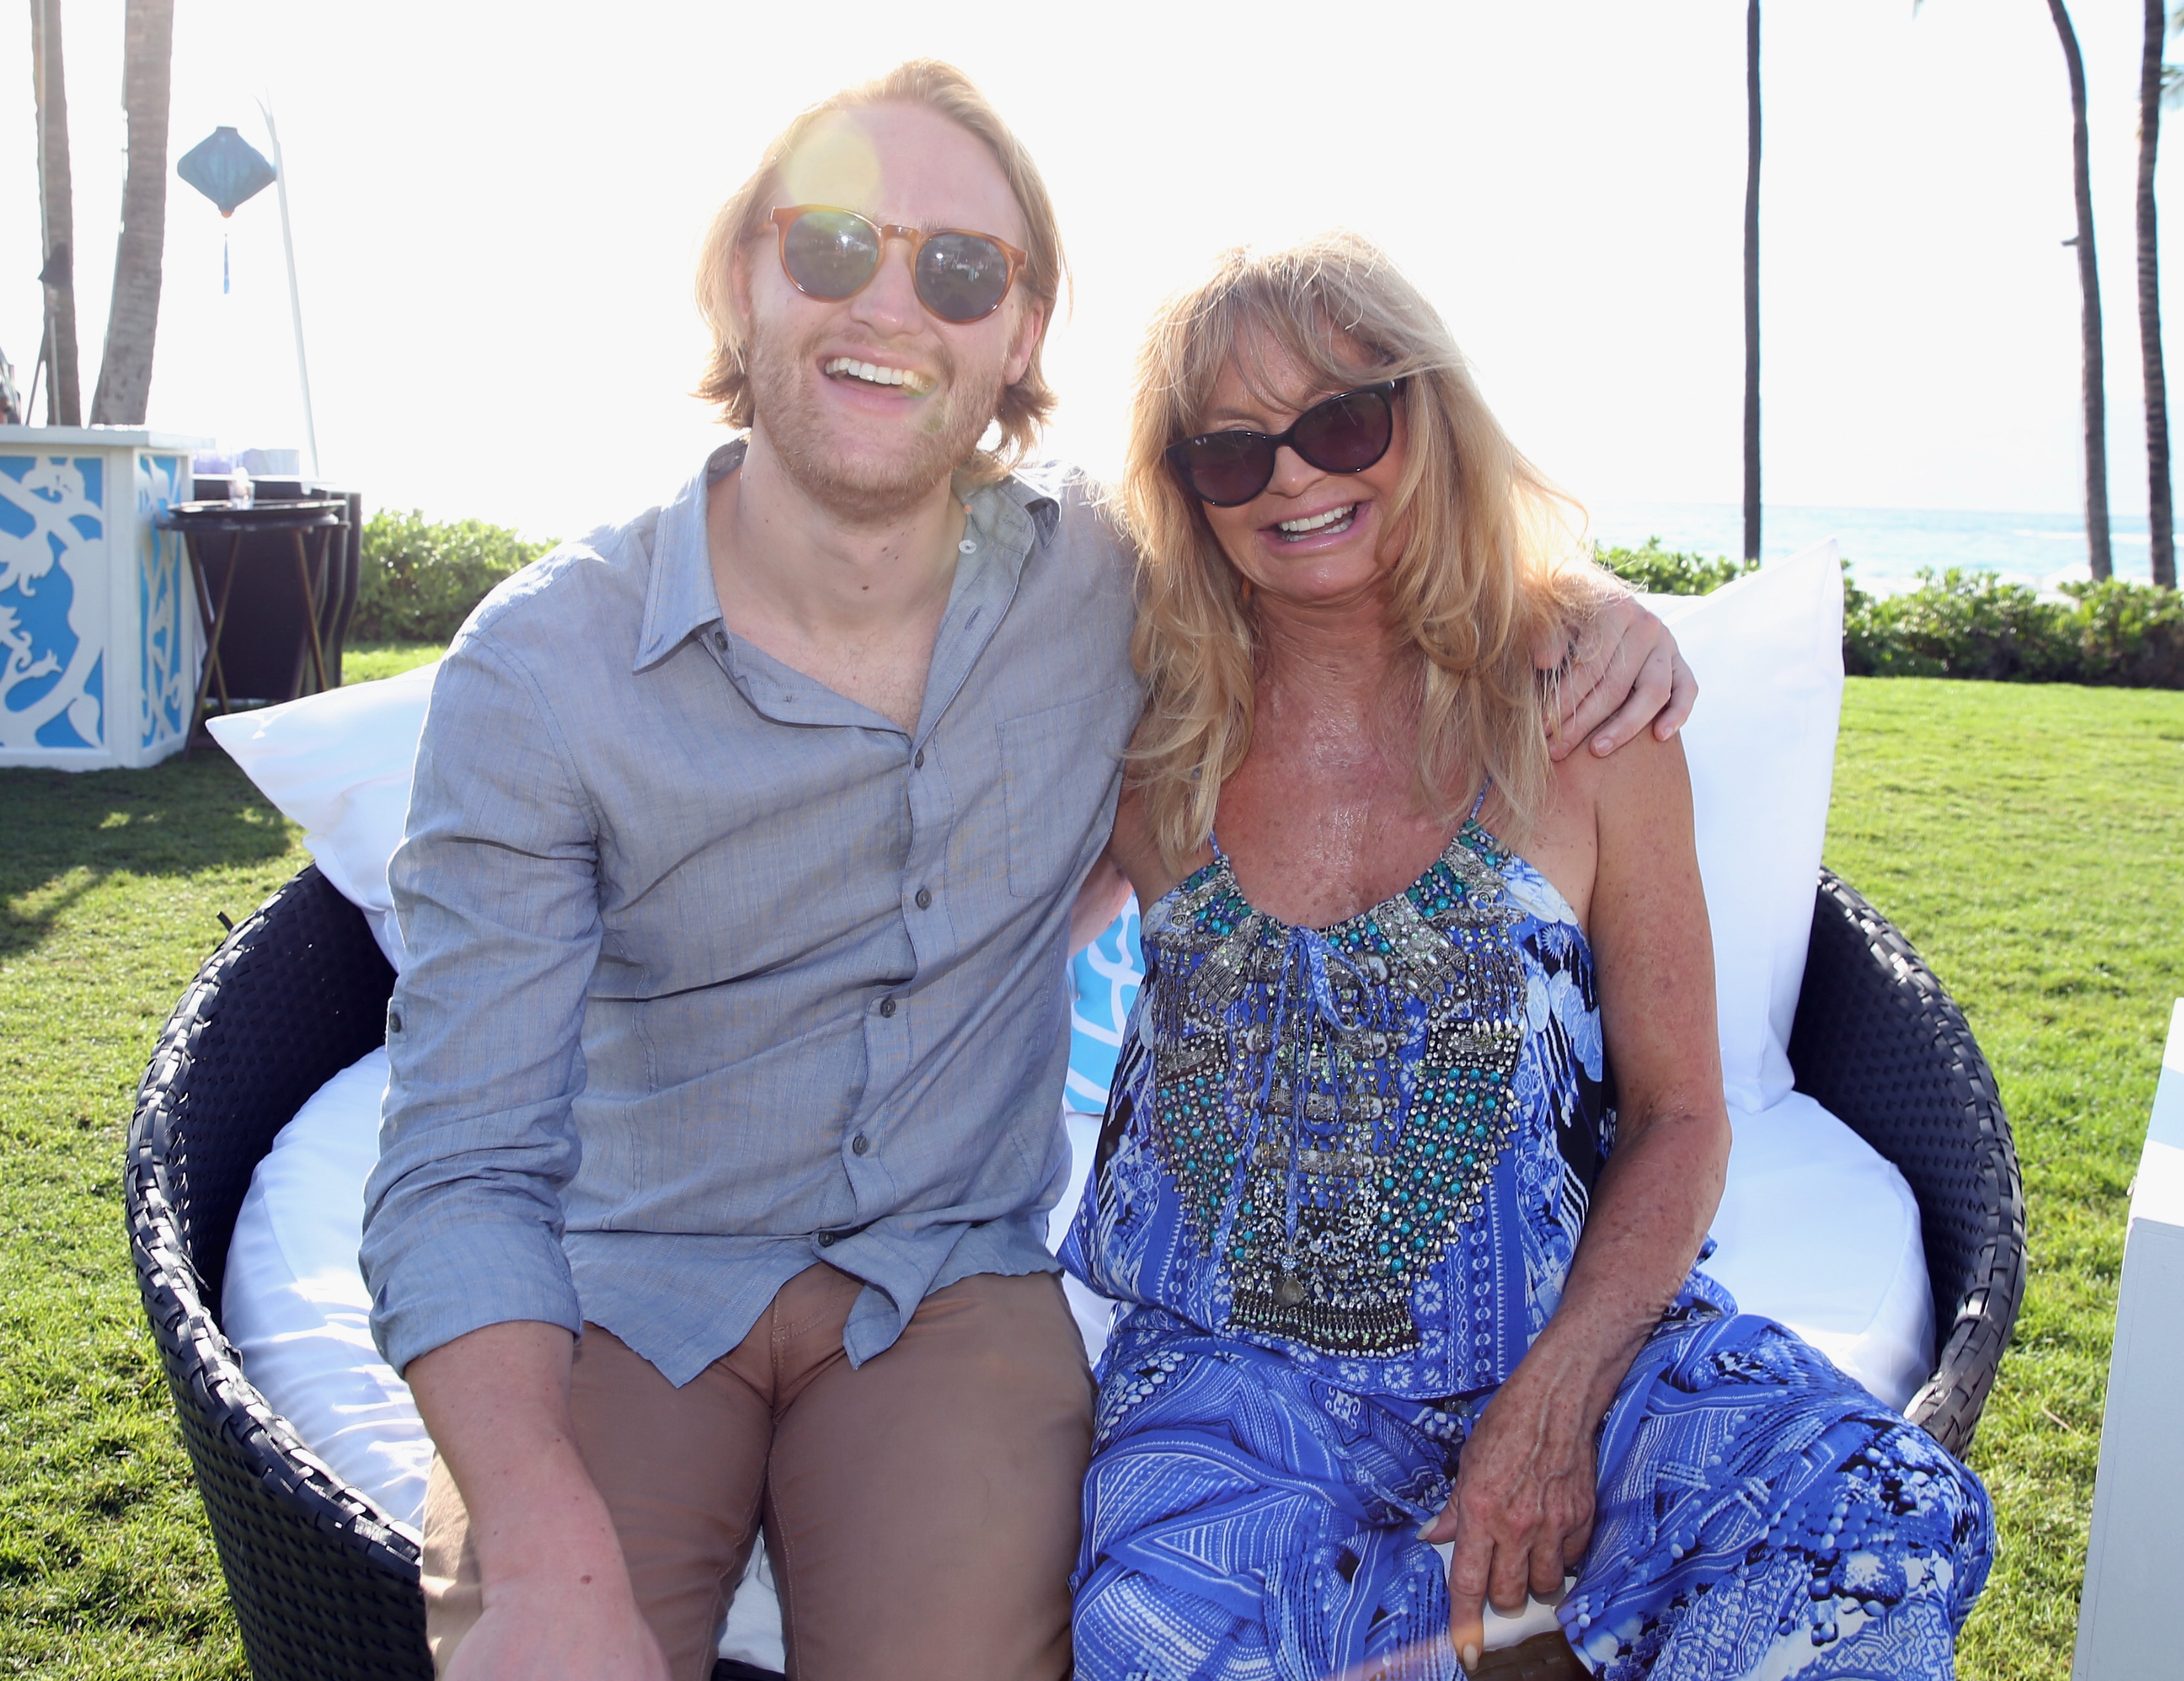 Wyatt Russell and Goldie Hawn at Maui Film Festival's Taste of Summer Opening Night Celebration at Grand Wailea on June 15, 2016 in Wailea, Hawaii. | Source: Getty Images